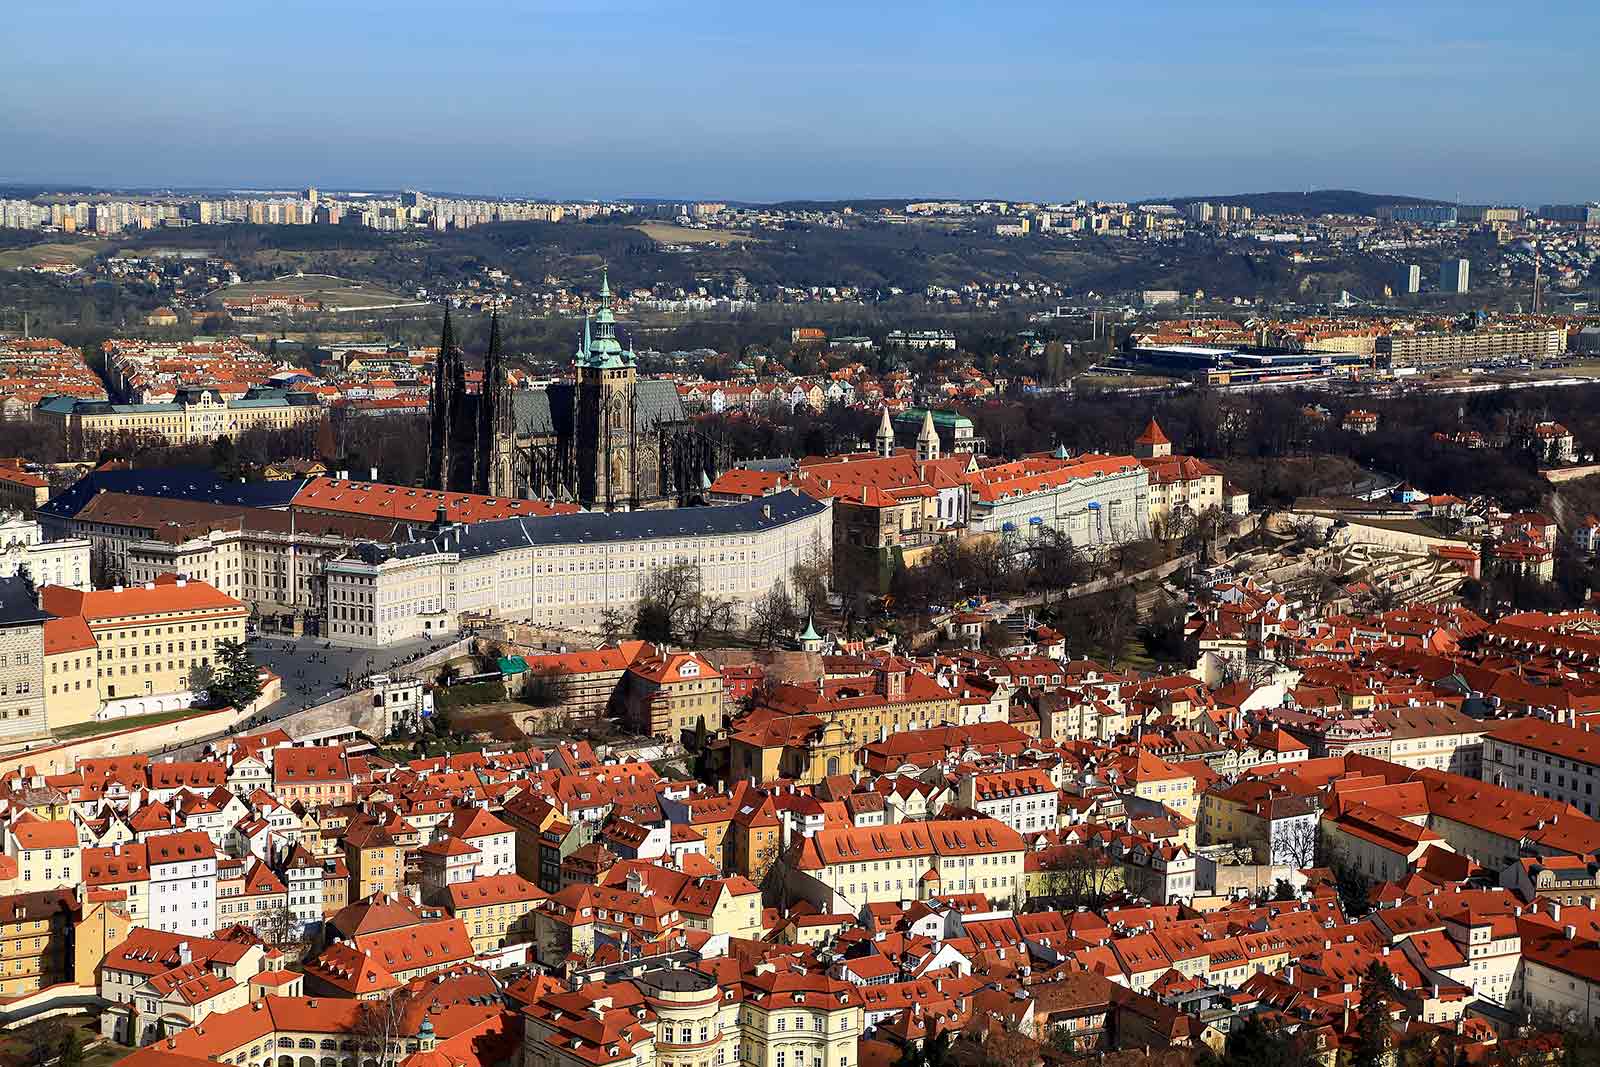 The view over Prague from Petrin Tower.